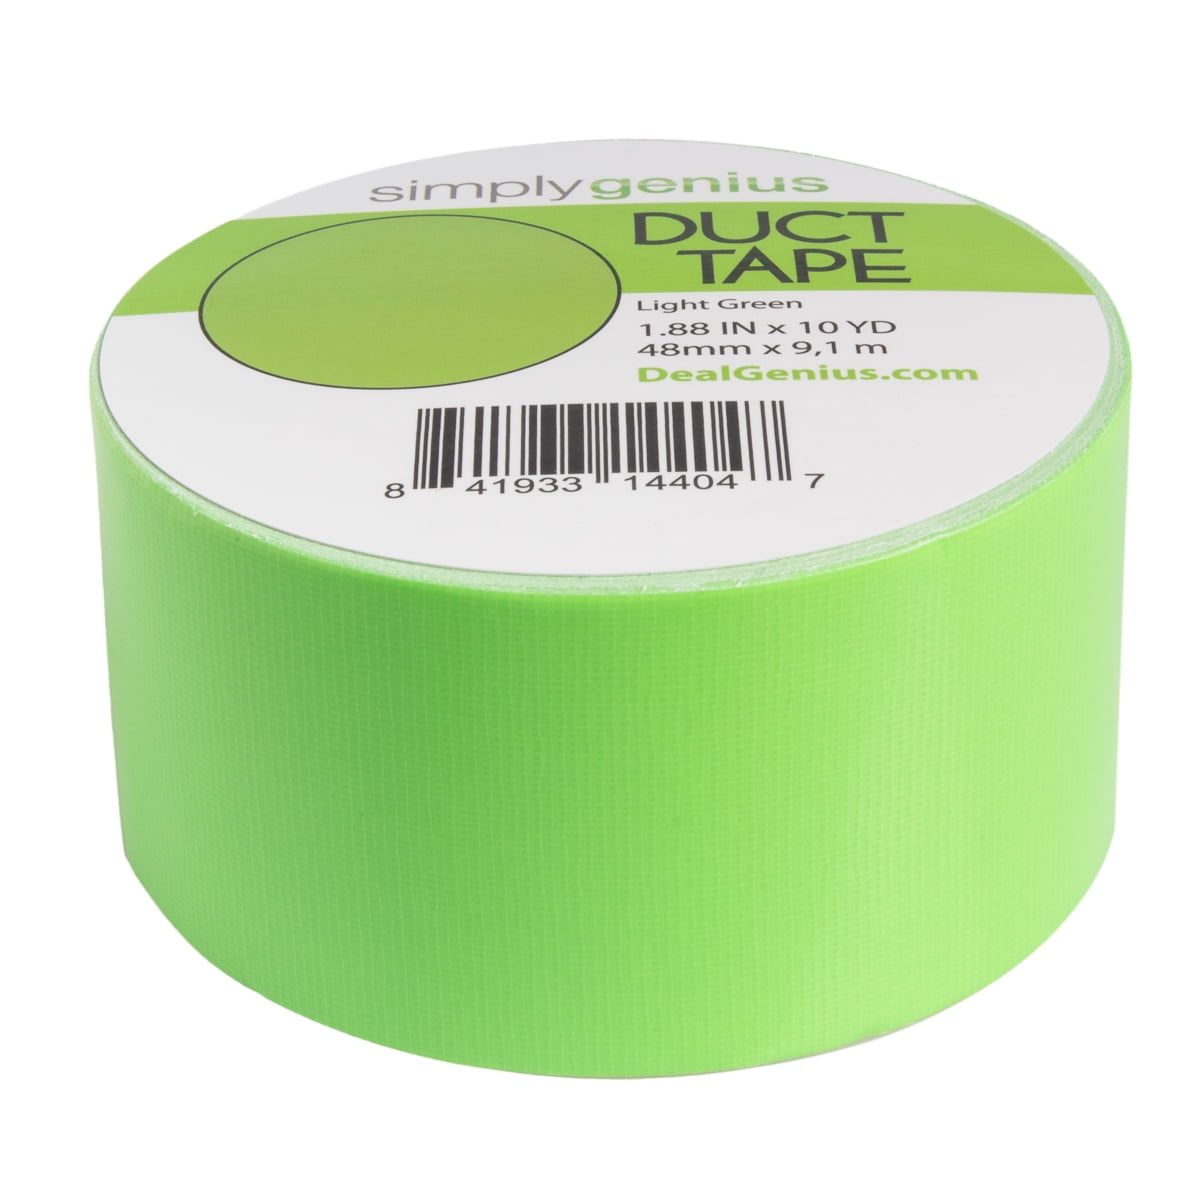 Decorative duct tape, 12-pack